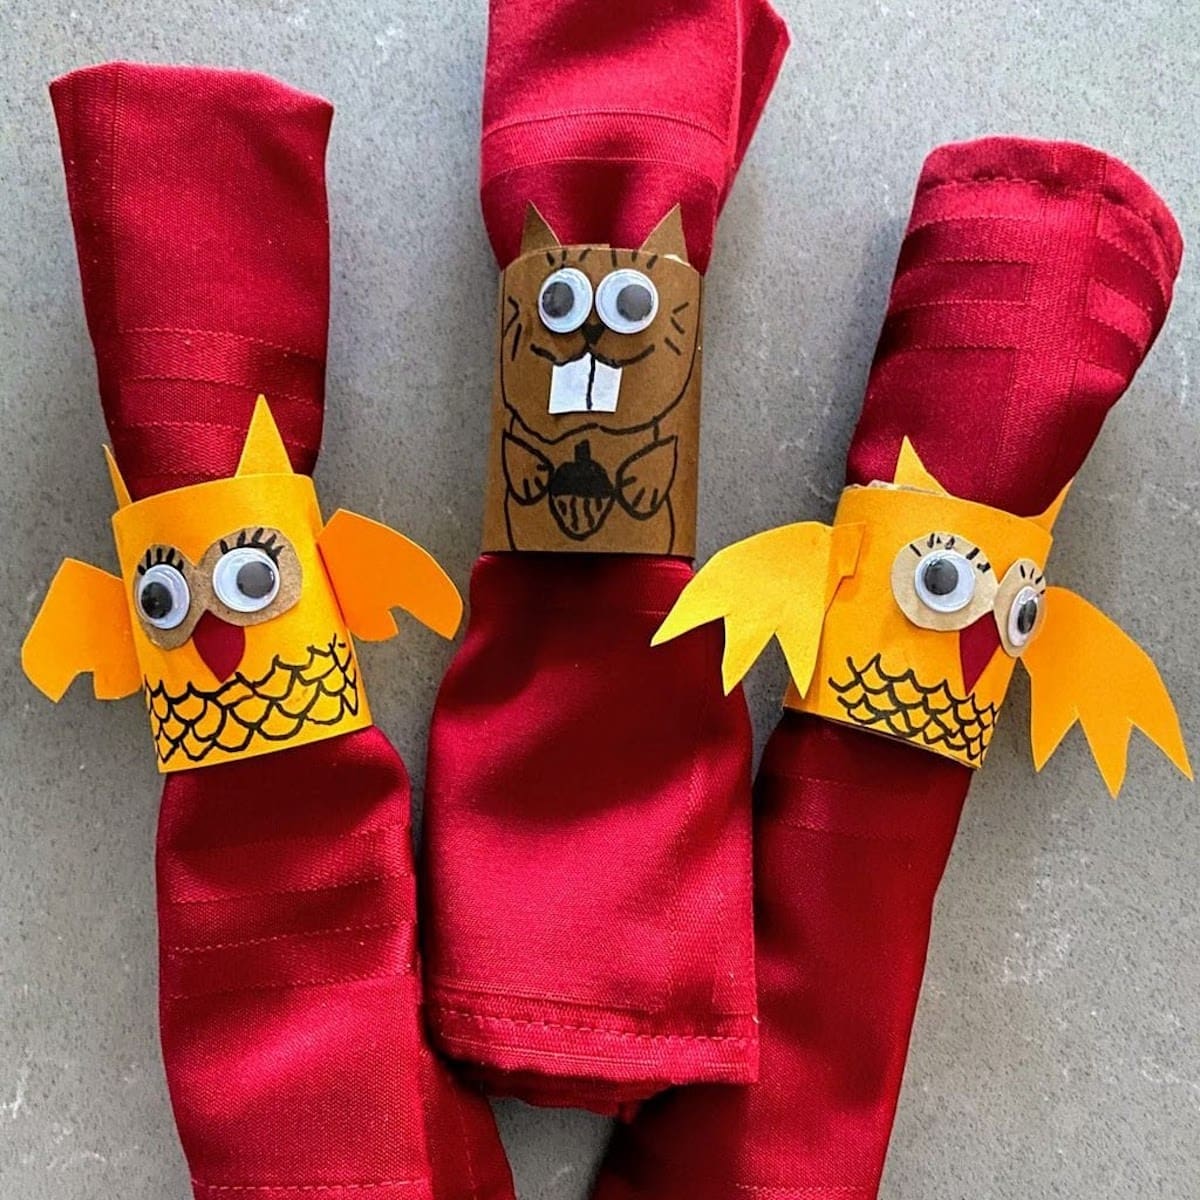 three napkin rings of owls and a squirrel holding red napkins